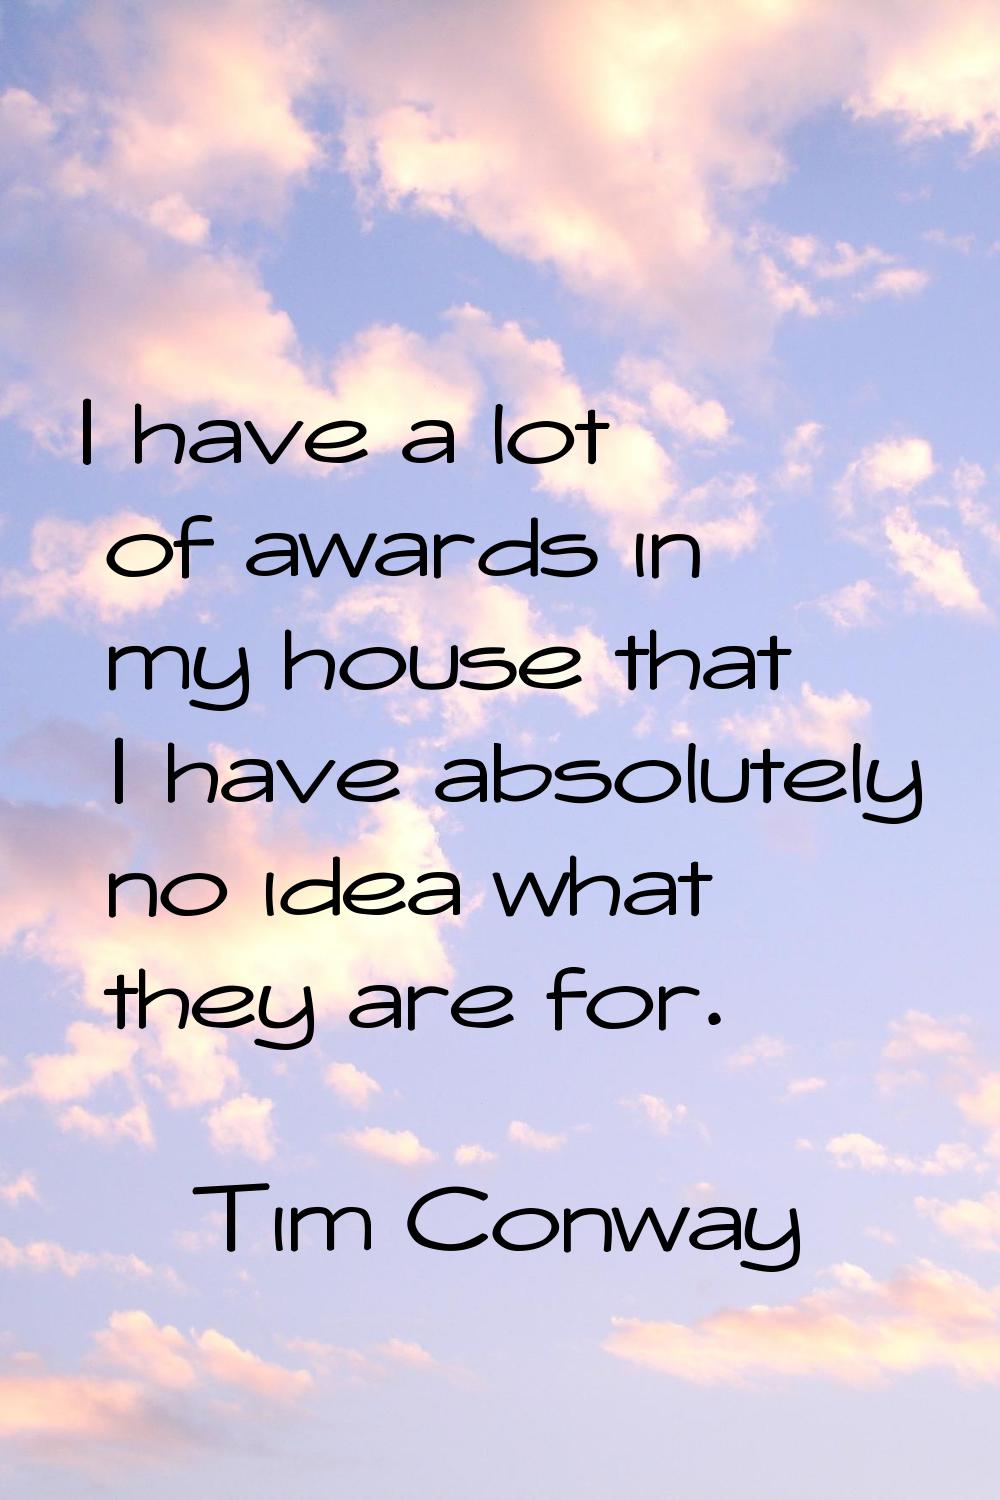 I have a lot of awards in my house that I have absolutely no idea what they are for.